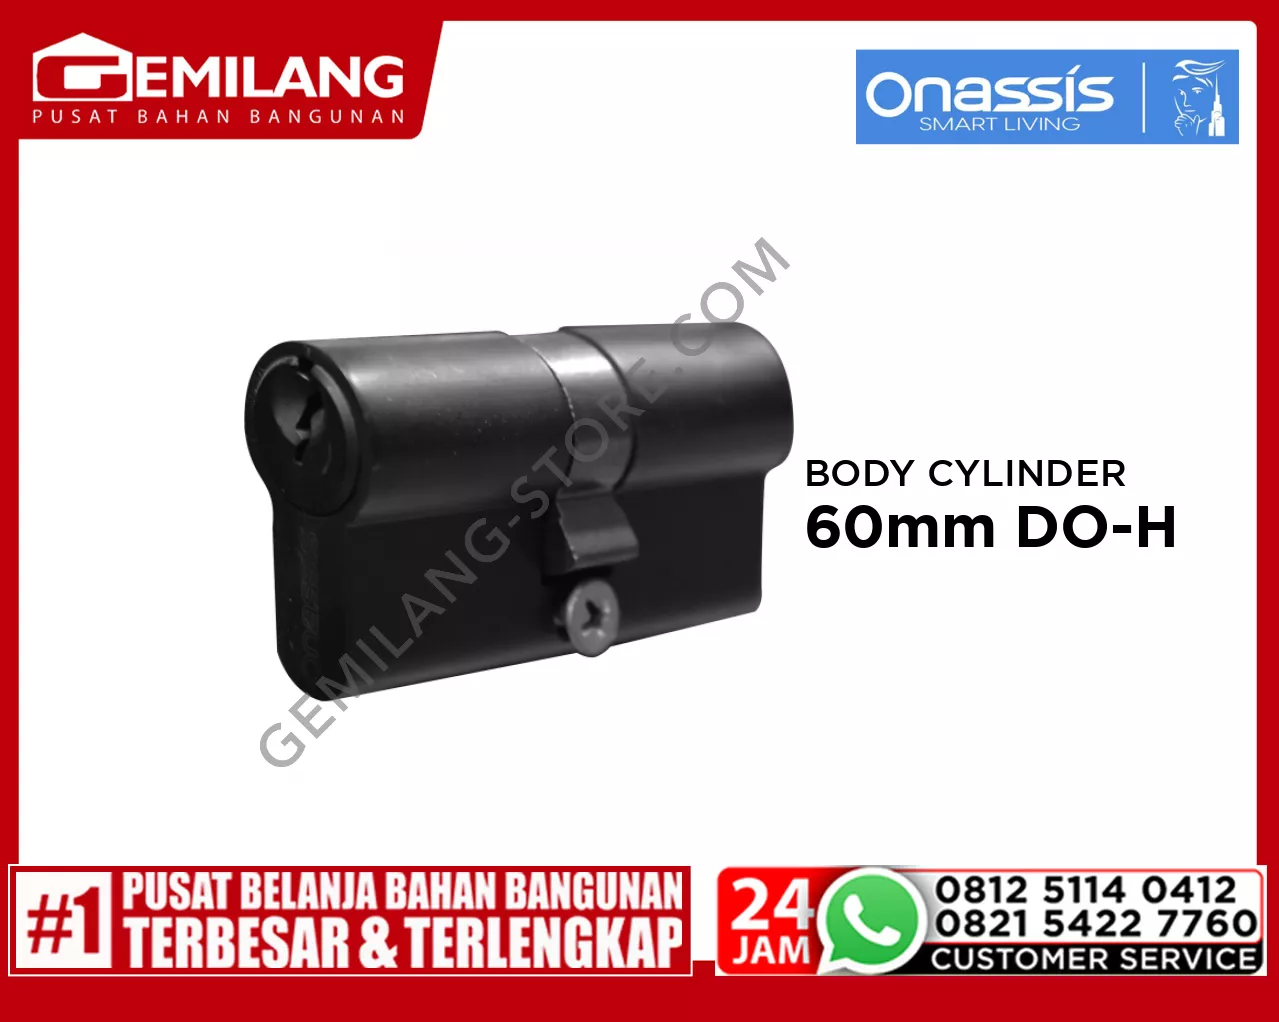 ONASSIS BODY CYLINDER CY/ONS 60mm DO-H BLACK